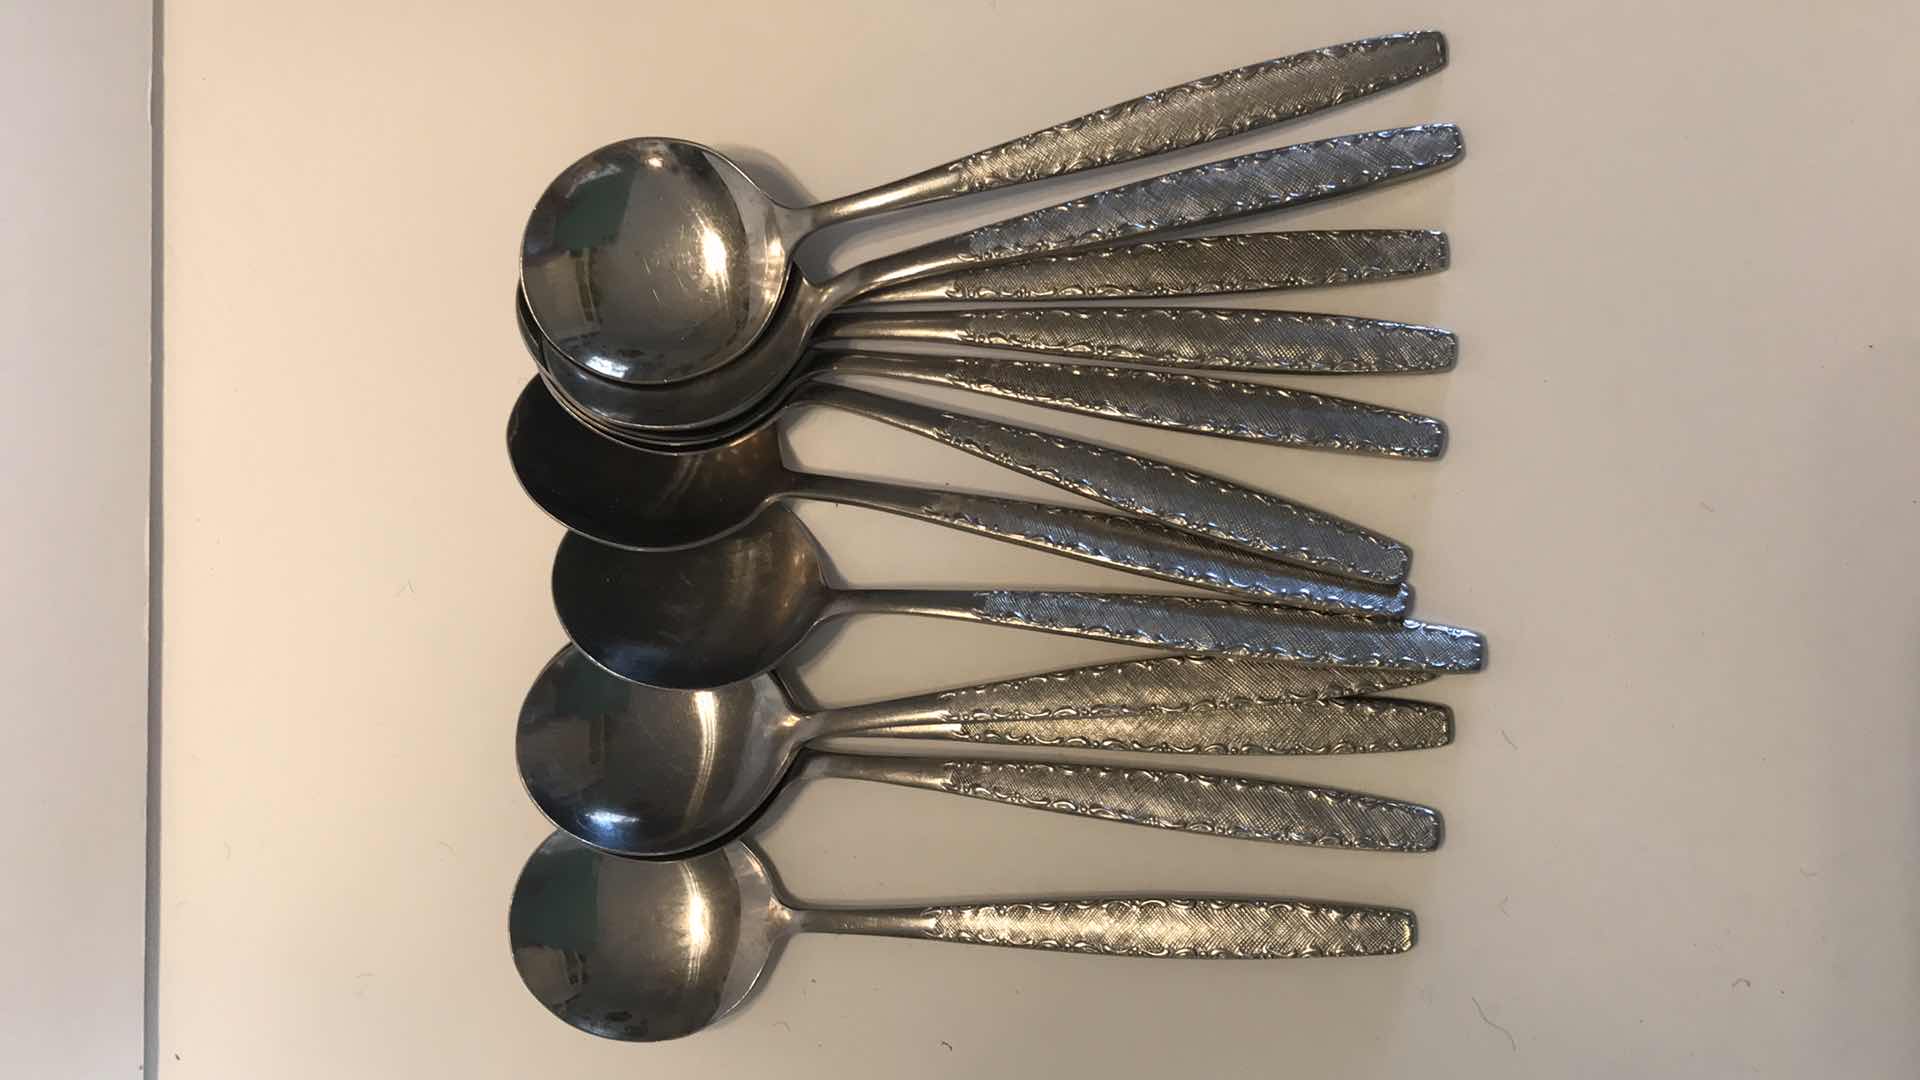 Photo 2 of VINTAGE EDWARD DON & CO SILVERWARE MADE IN KOREA 12 - FORKS 12-TEASPOONS AND 12-SOUP SPOONS